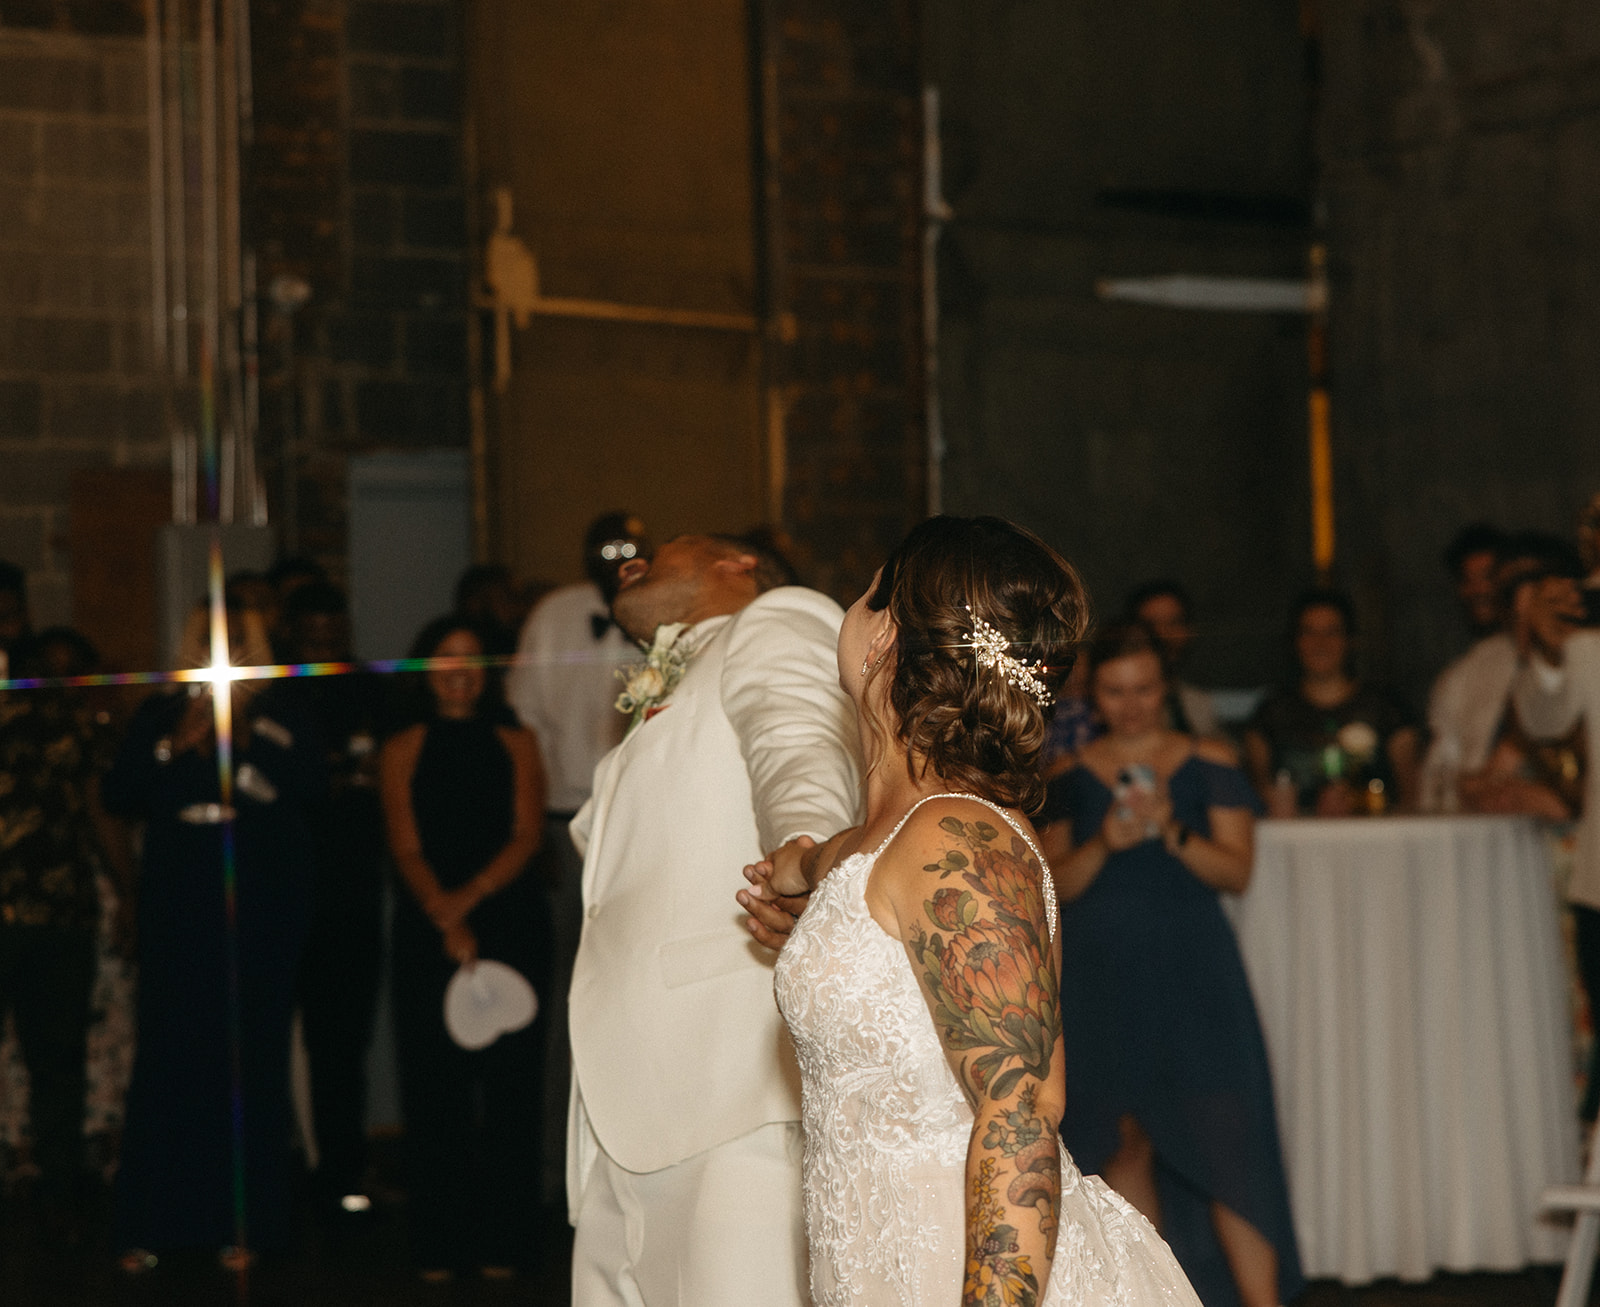 Bride and grooms first dance at Jam Handy wedding venue in Detroit, Michigan